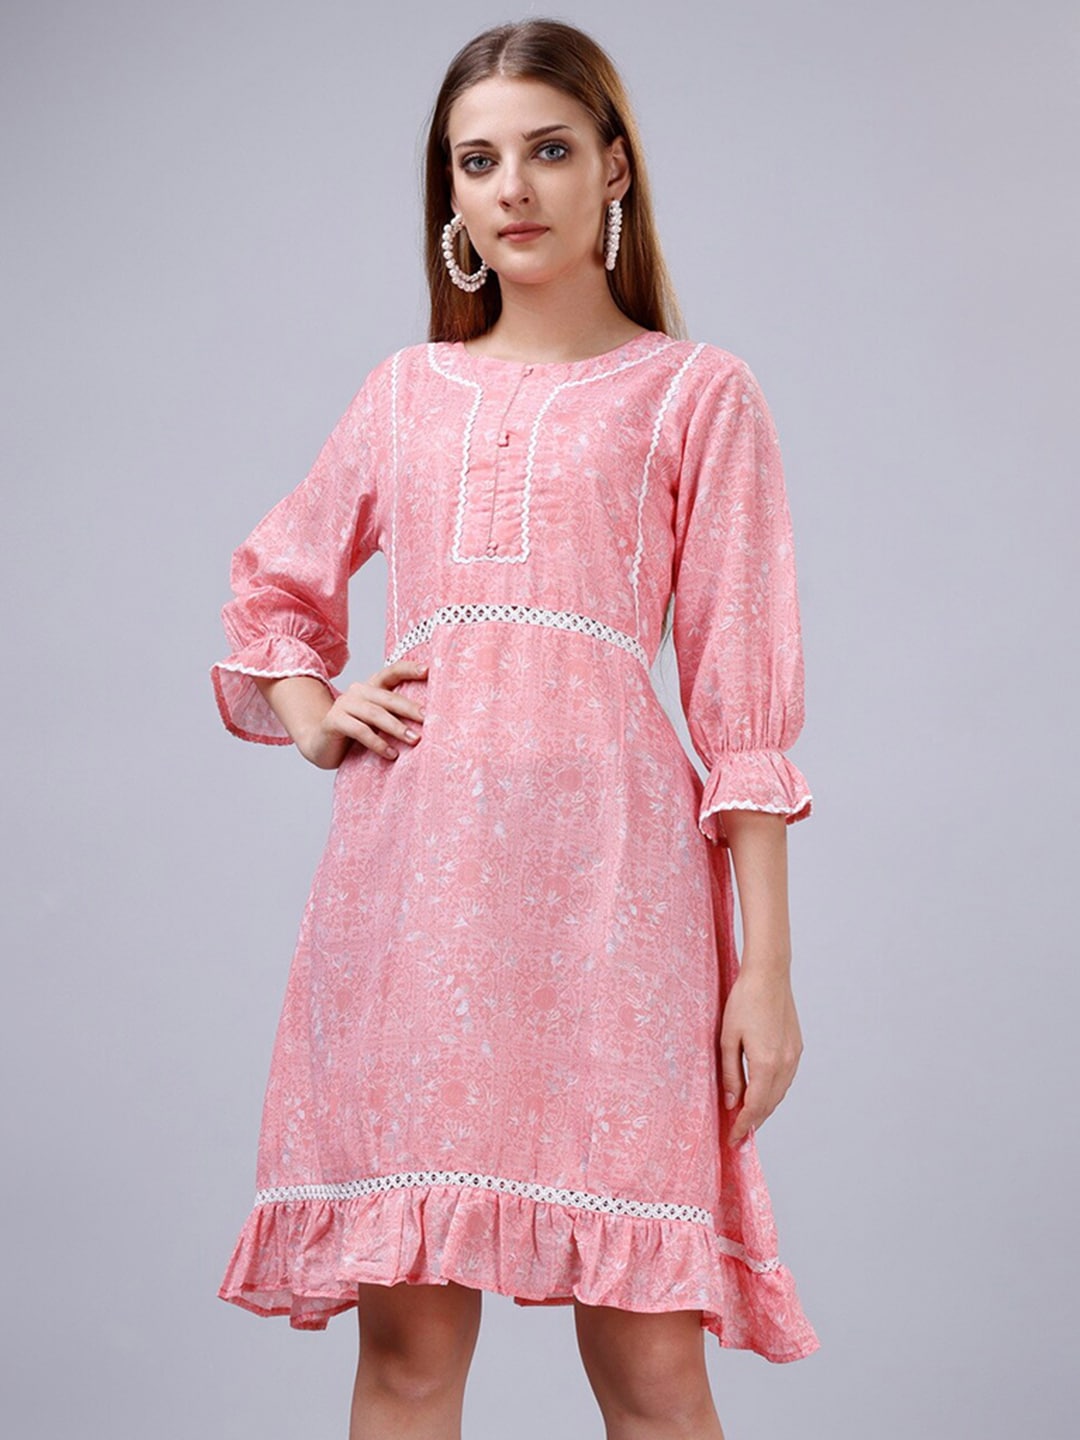 GoStyle Floral Printed Puffed Sleeves Lace Inserts Cotton Fit and Flare Dress Price in India